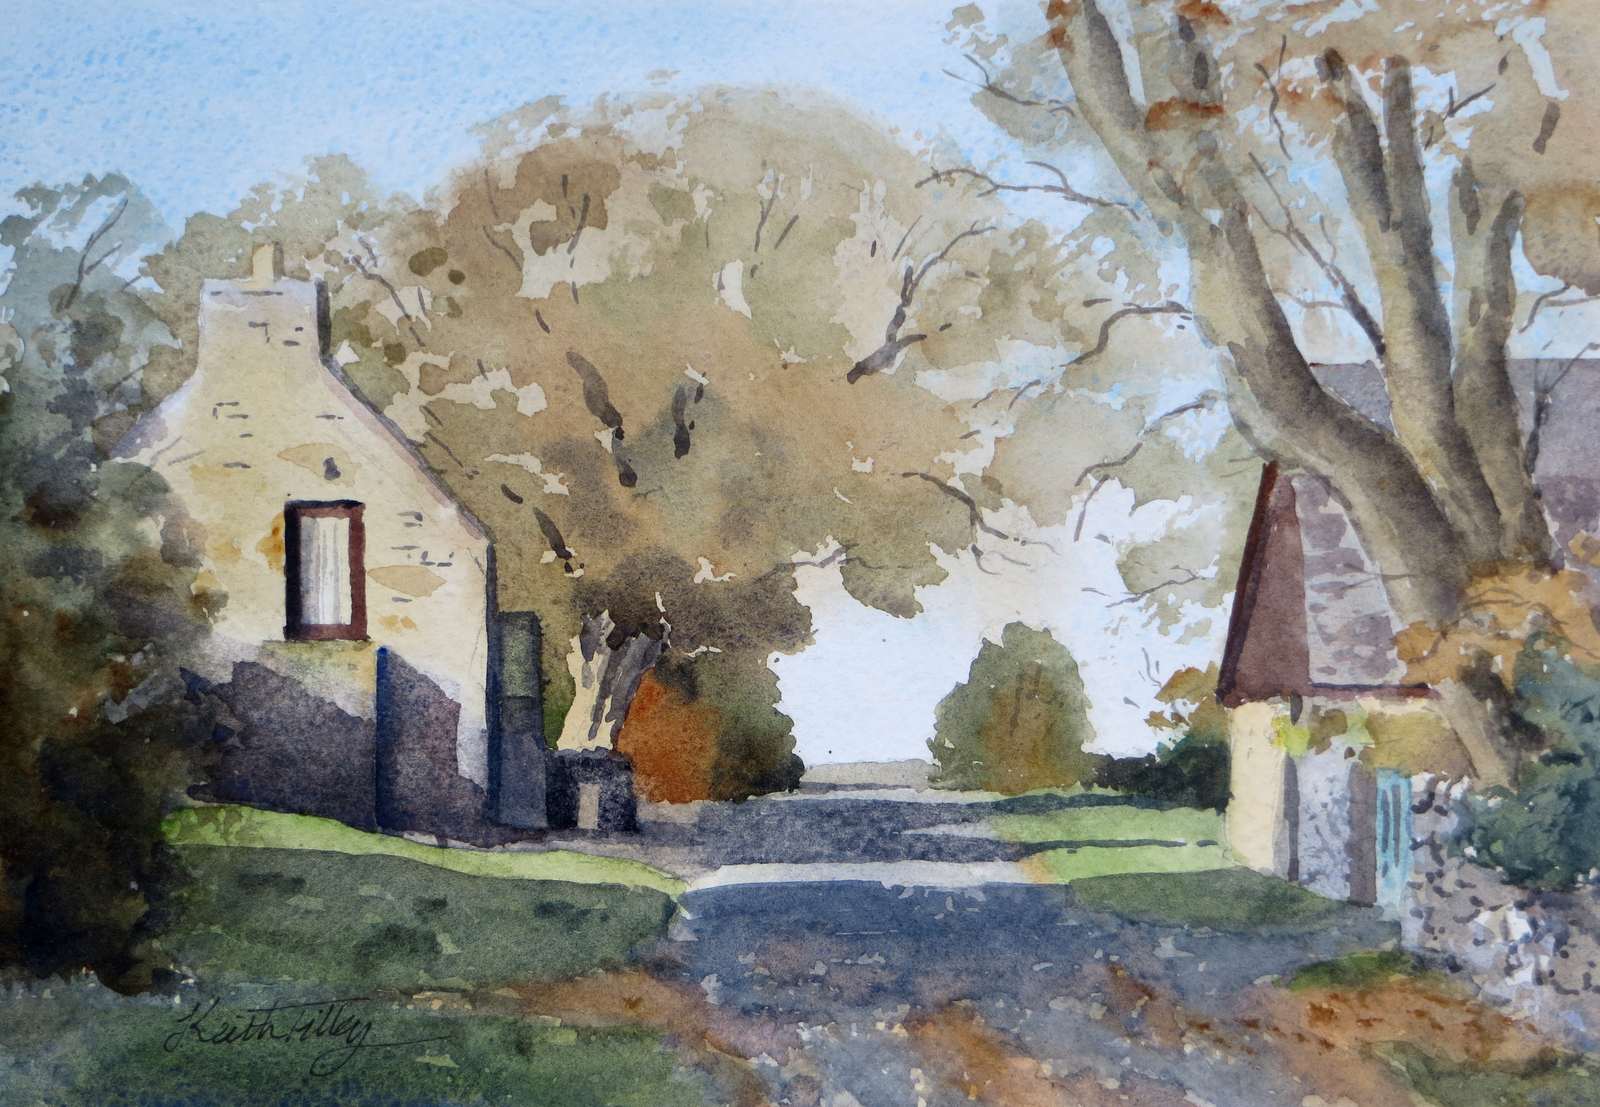 Shadows at Calder. Original watercolour by Keith Tilley. View in a hamlet in Caithness, northern Scotland.